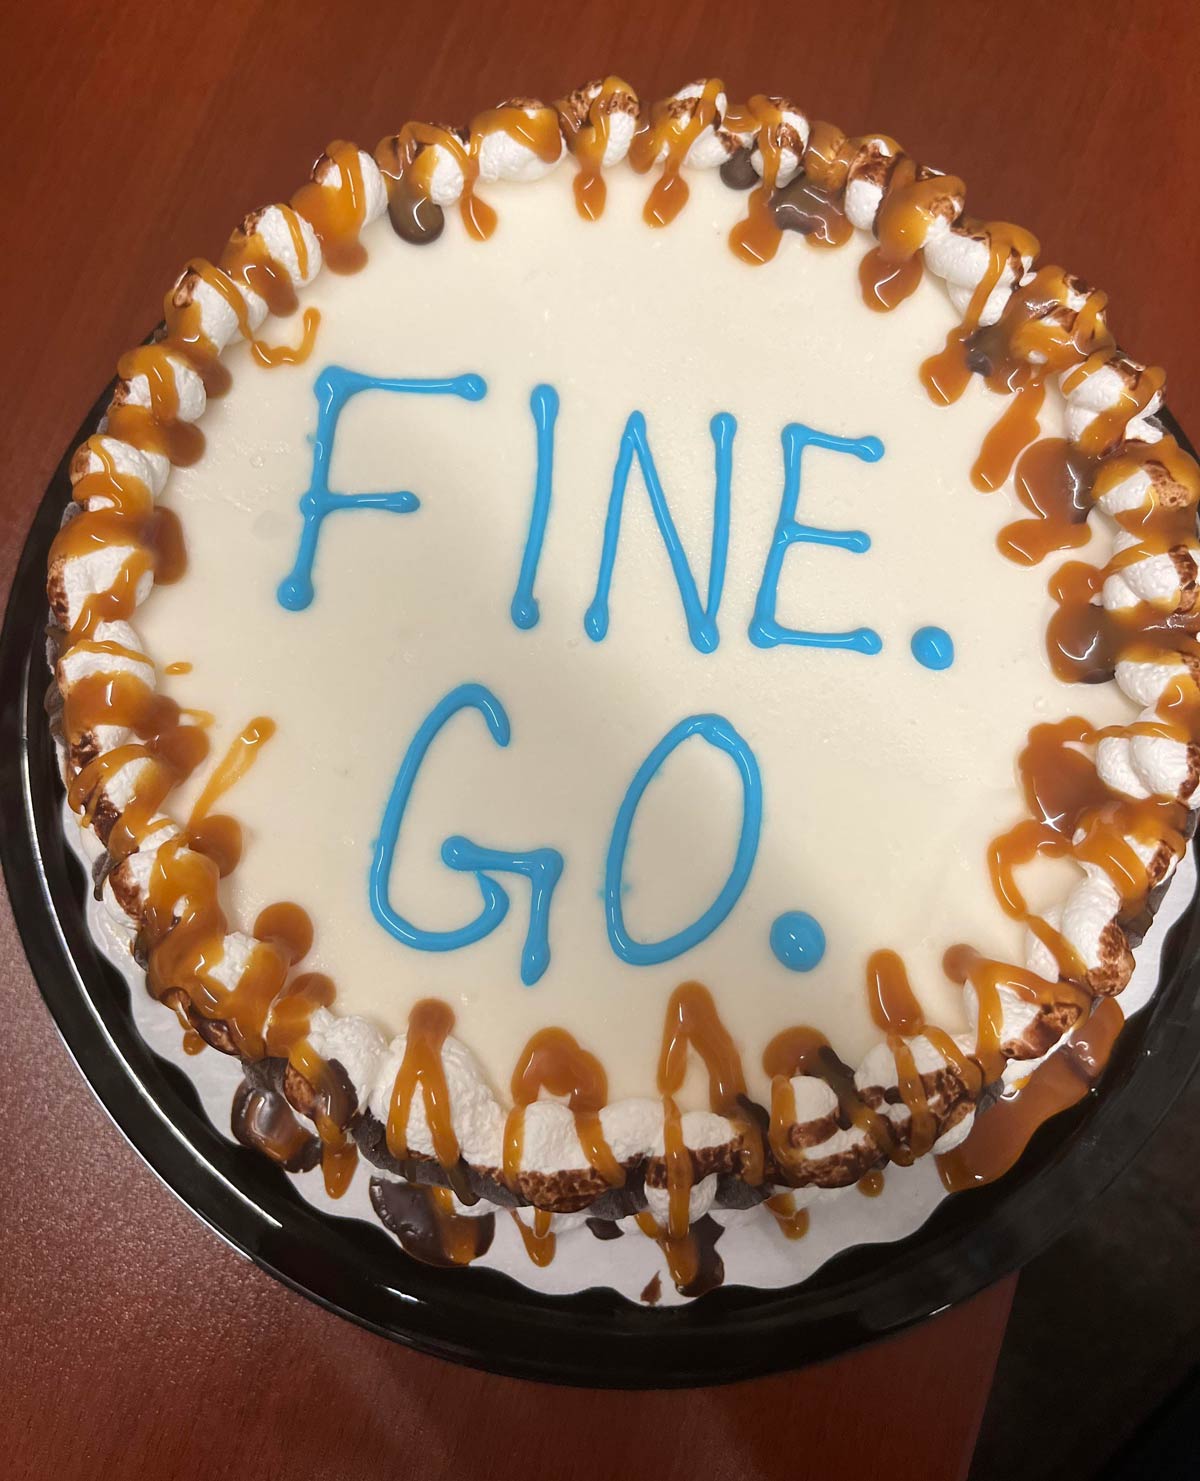 My coworkers got me a cake for my last day on the job